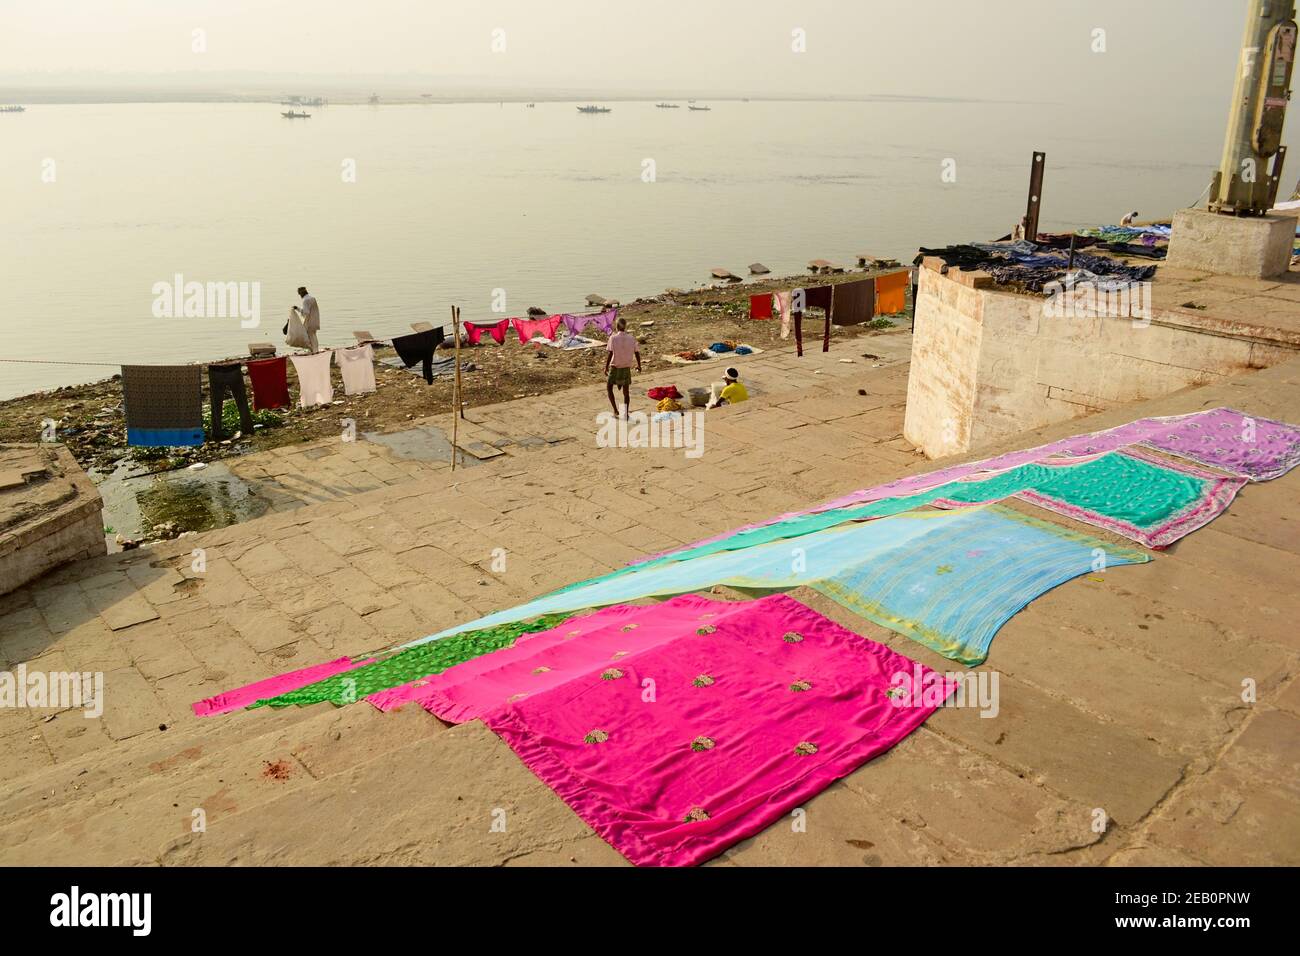 Varanasi, India - April, 2014: Drying clothes on the ghats along Ganges. Colorful saree drying on the floor. Outdoor hand wash laundry. Stock Photo